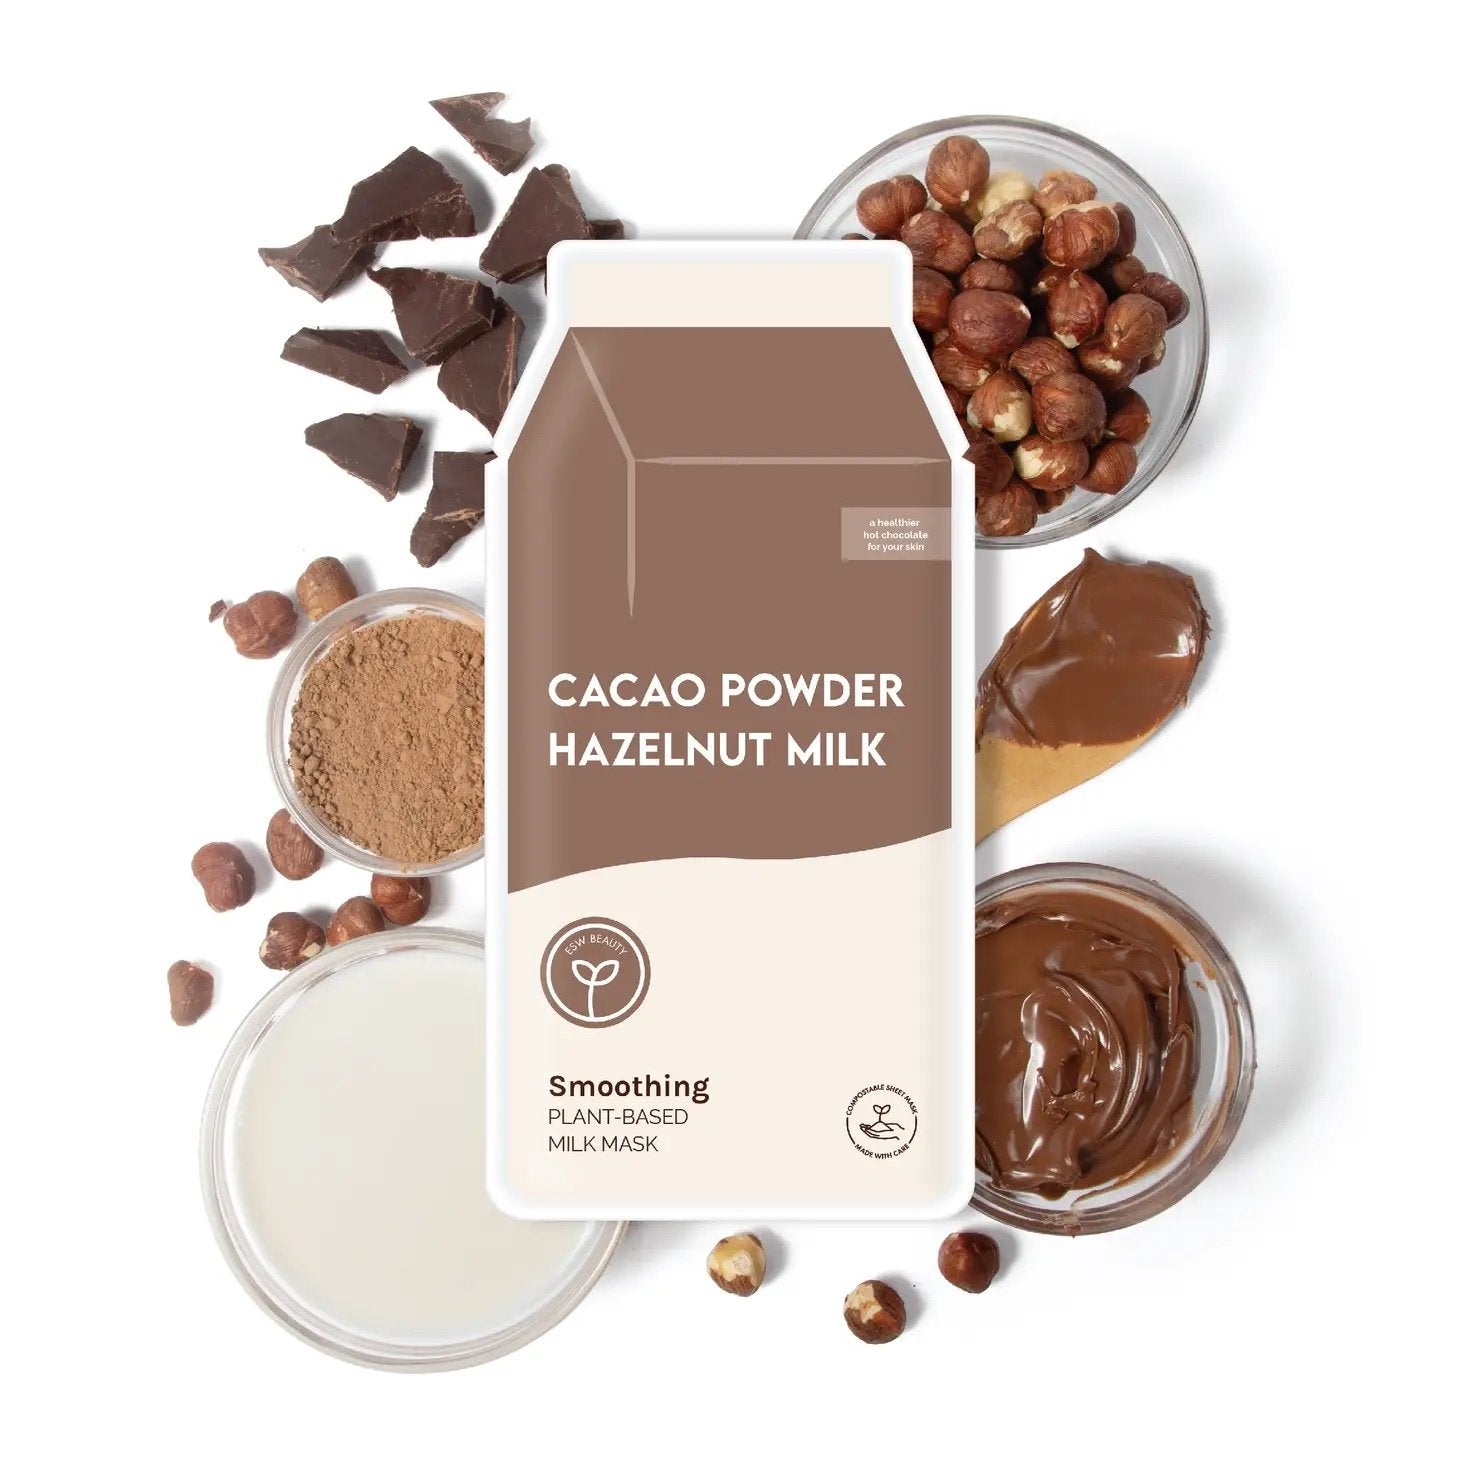 Cacao Powder Hazelnut Milk Smoothing Plant-Based Milk Mask packaging surrounded by chocolate, hazelnuts, powders and creams.